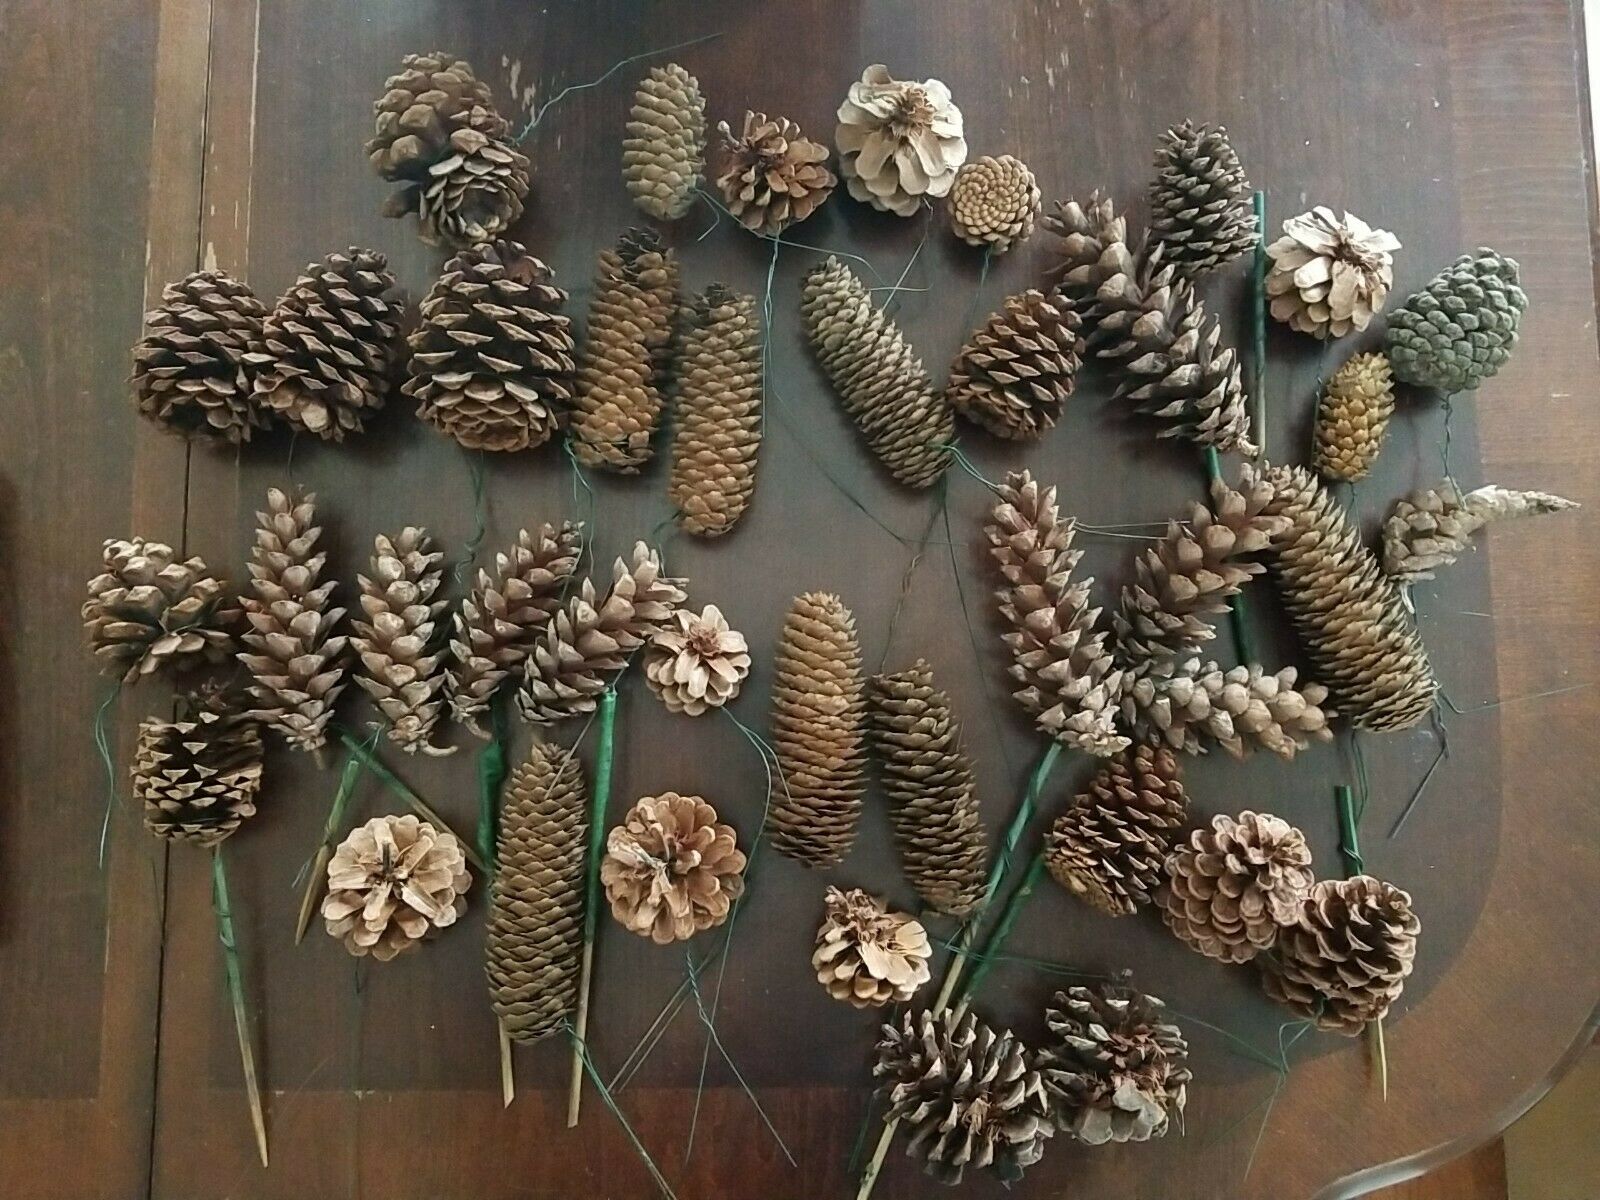 50 Mixed Natural Pine Cones With Wires Picks For Rustic Decor Wedding Wreaths